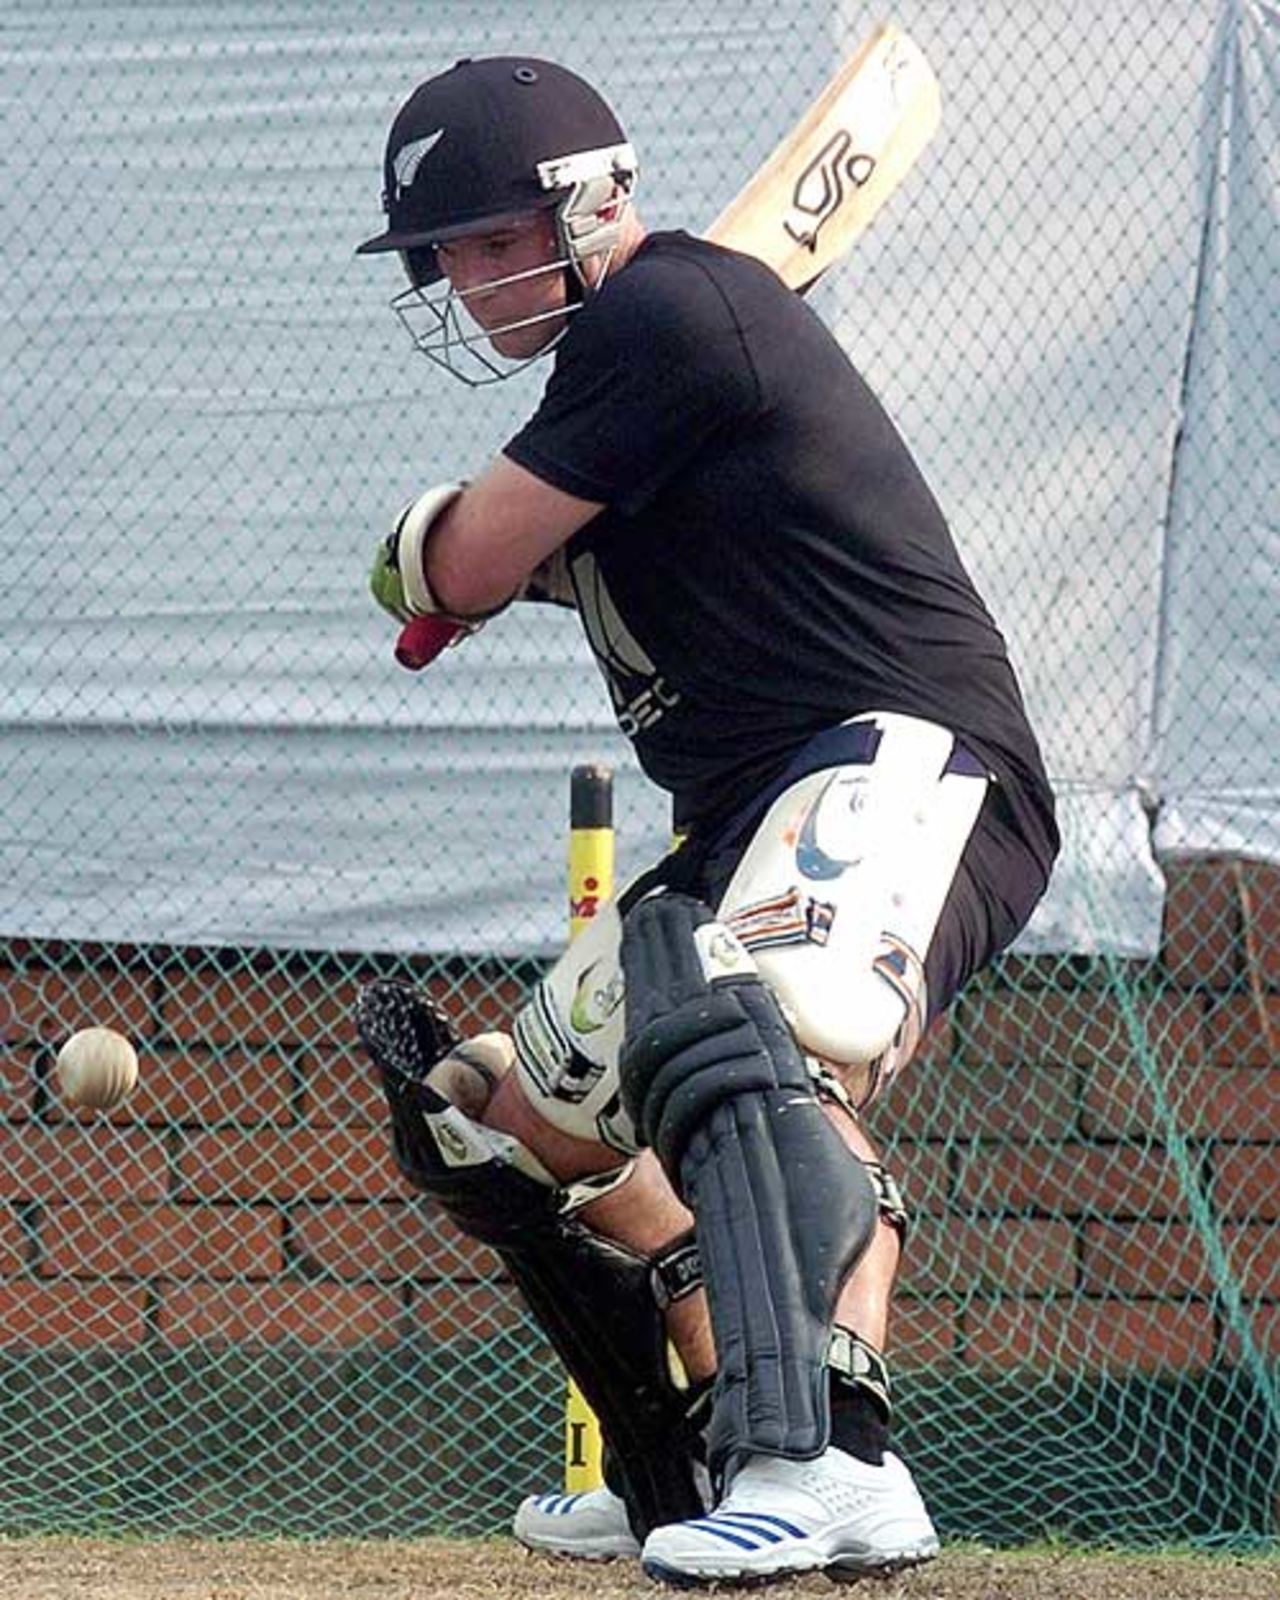 Gareth Hopkins prepares to cut the ball during a practice session, Dhaka, October 4, 2008